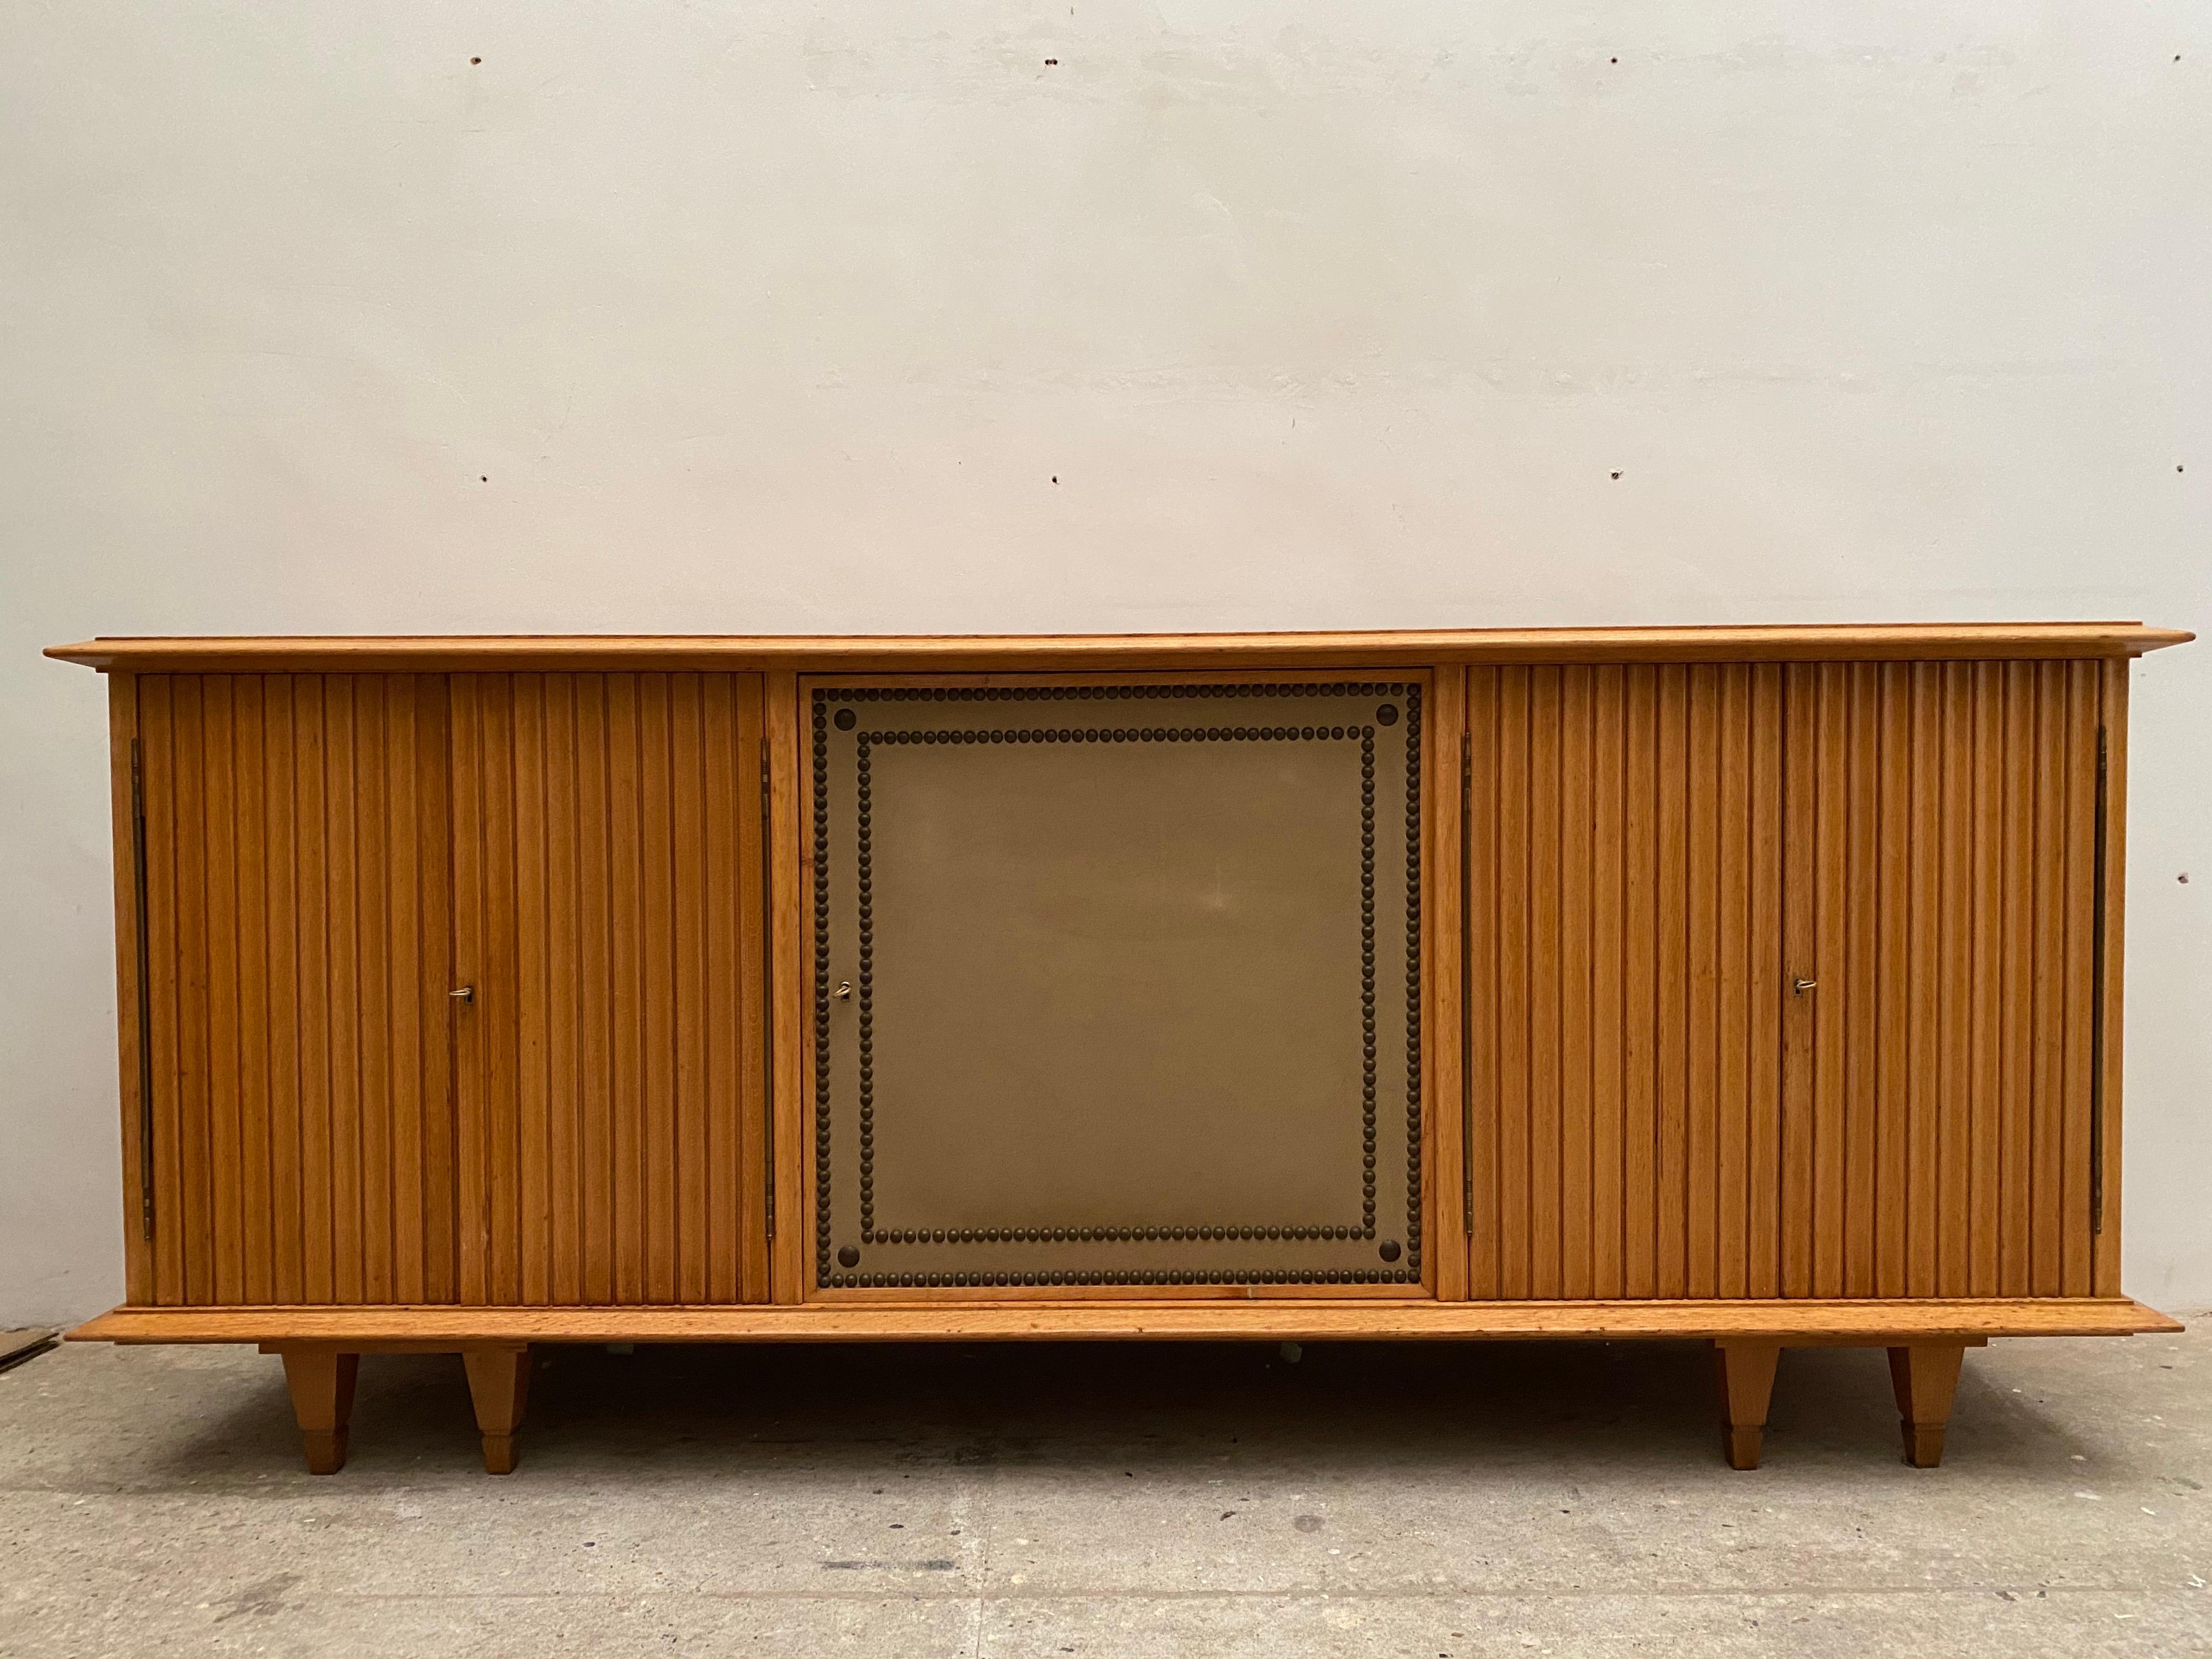 Hand-Crafted Brutalist Large Sideboard with Slatted Front 1940s De Coene, Belgium For Sale